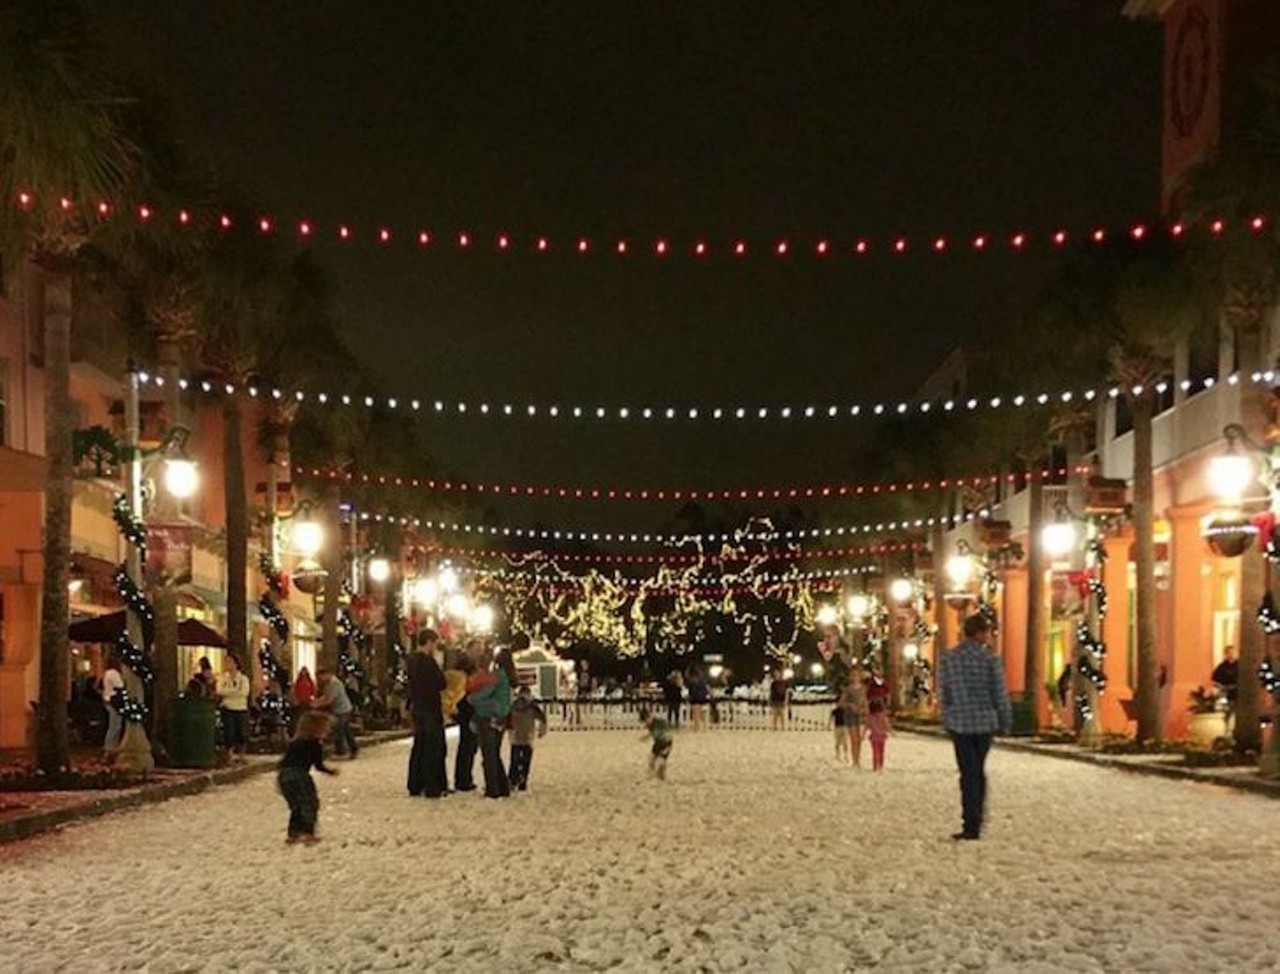 Now Snowing Celebration  
701 Front Street, Celebration
Nov. 24-Dec. 31
Snow&#146;s-a-fallin&#146; in Celebration and it&#146;s just begging to be basked in. It&#146;s not often that Floridians get to enjoy snow in any fashion, so get your snow angels in while you can. 
Photo via Orlando Weekly